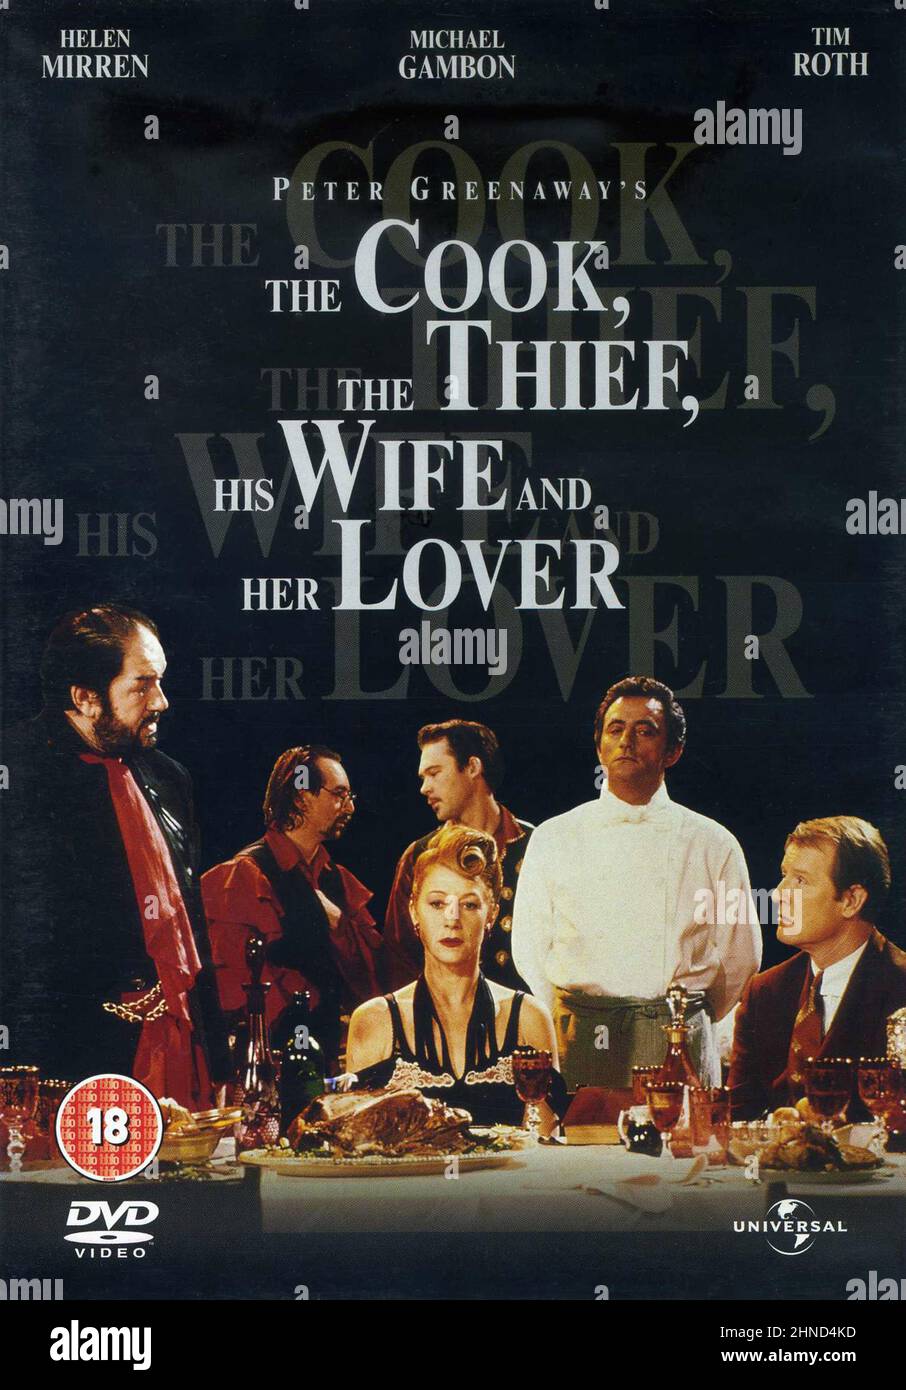 DVD Cover. 'The Cook, the Thief, His Wife and Her Lover'. Peter Greenaway. Stock Photo